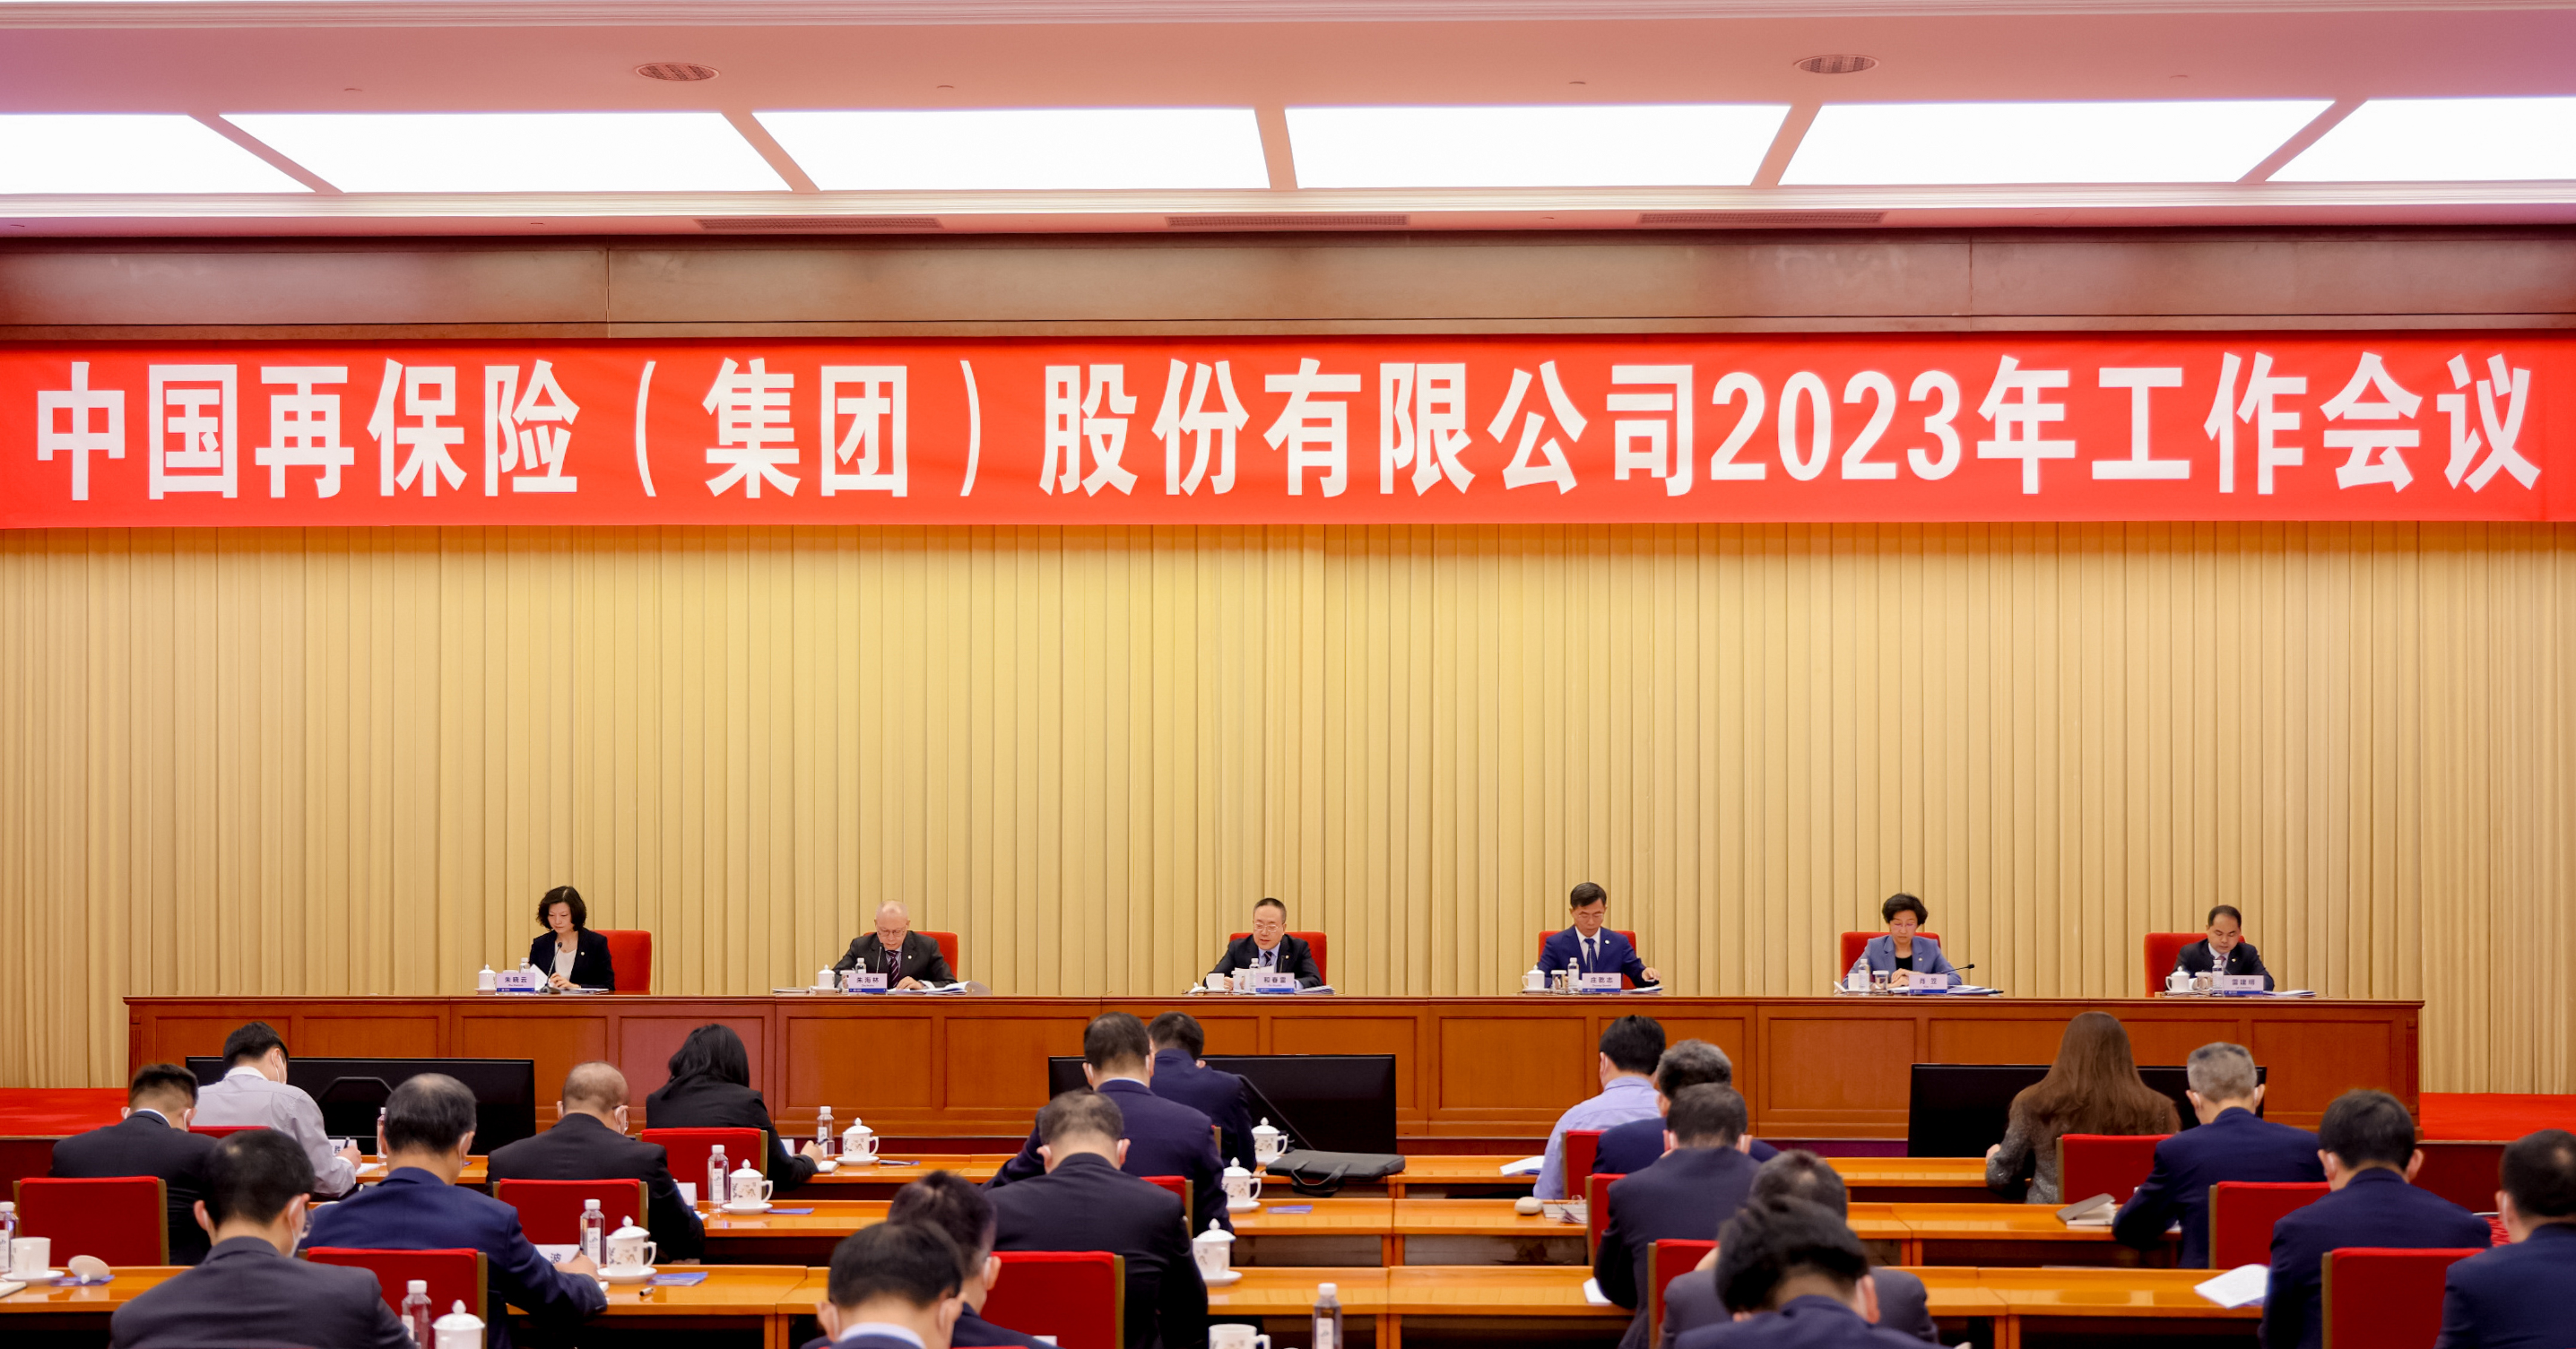 China Re Group Holds Work Meeting of 2023